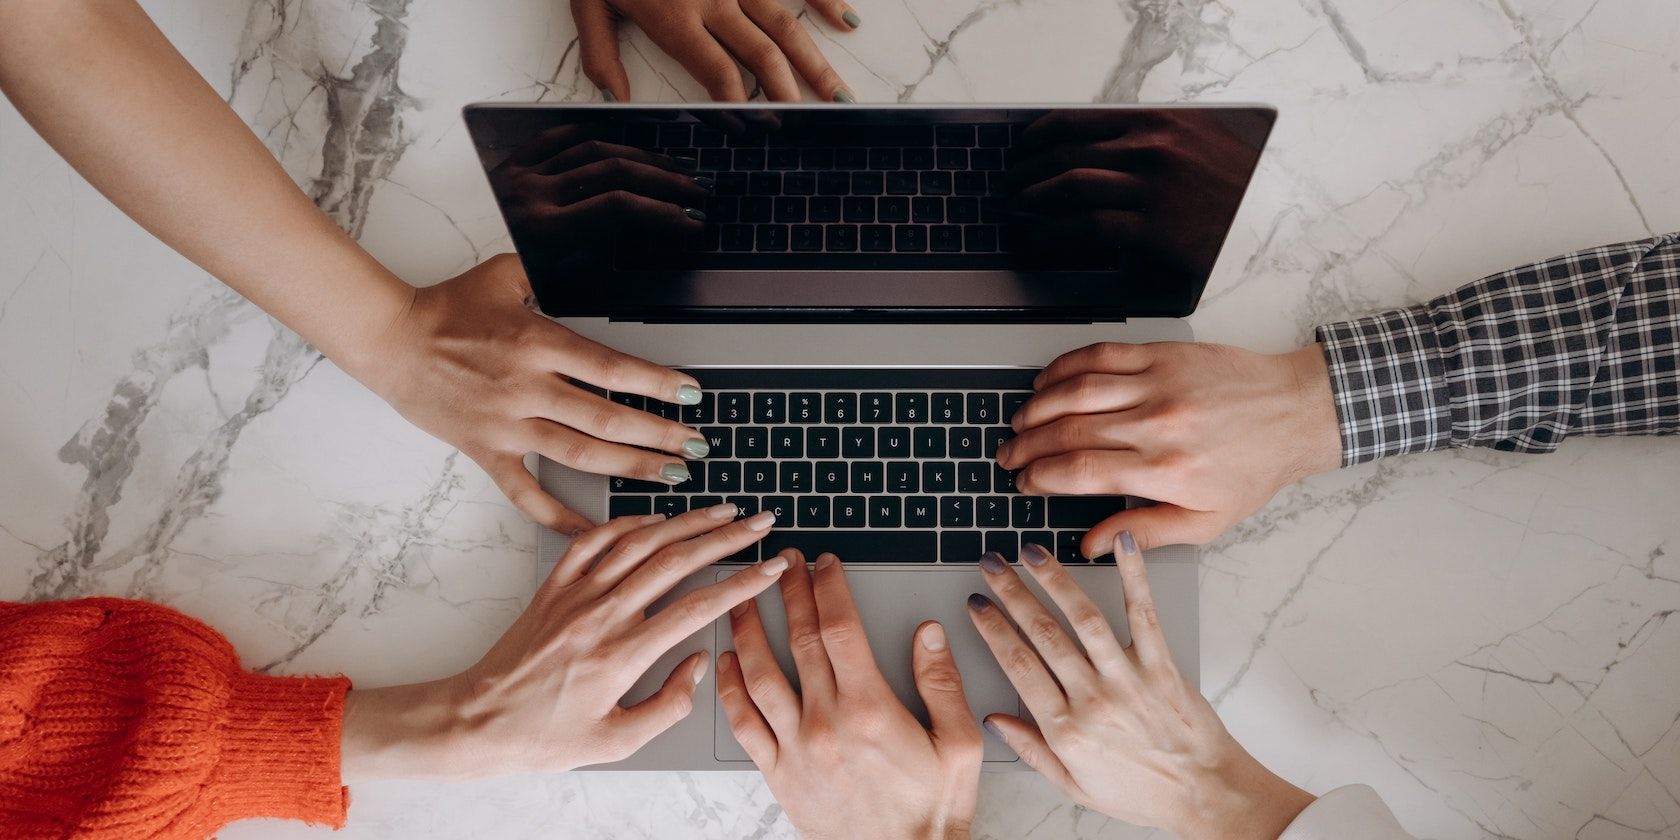 Multiple hands from multiple people all touch different parts of a MacBook keyboard.